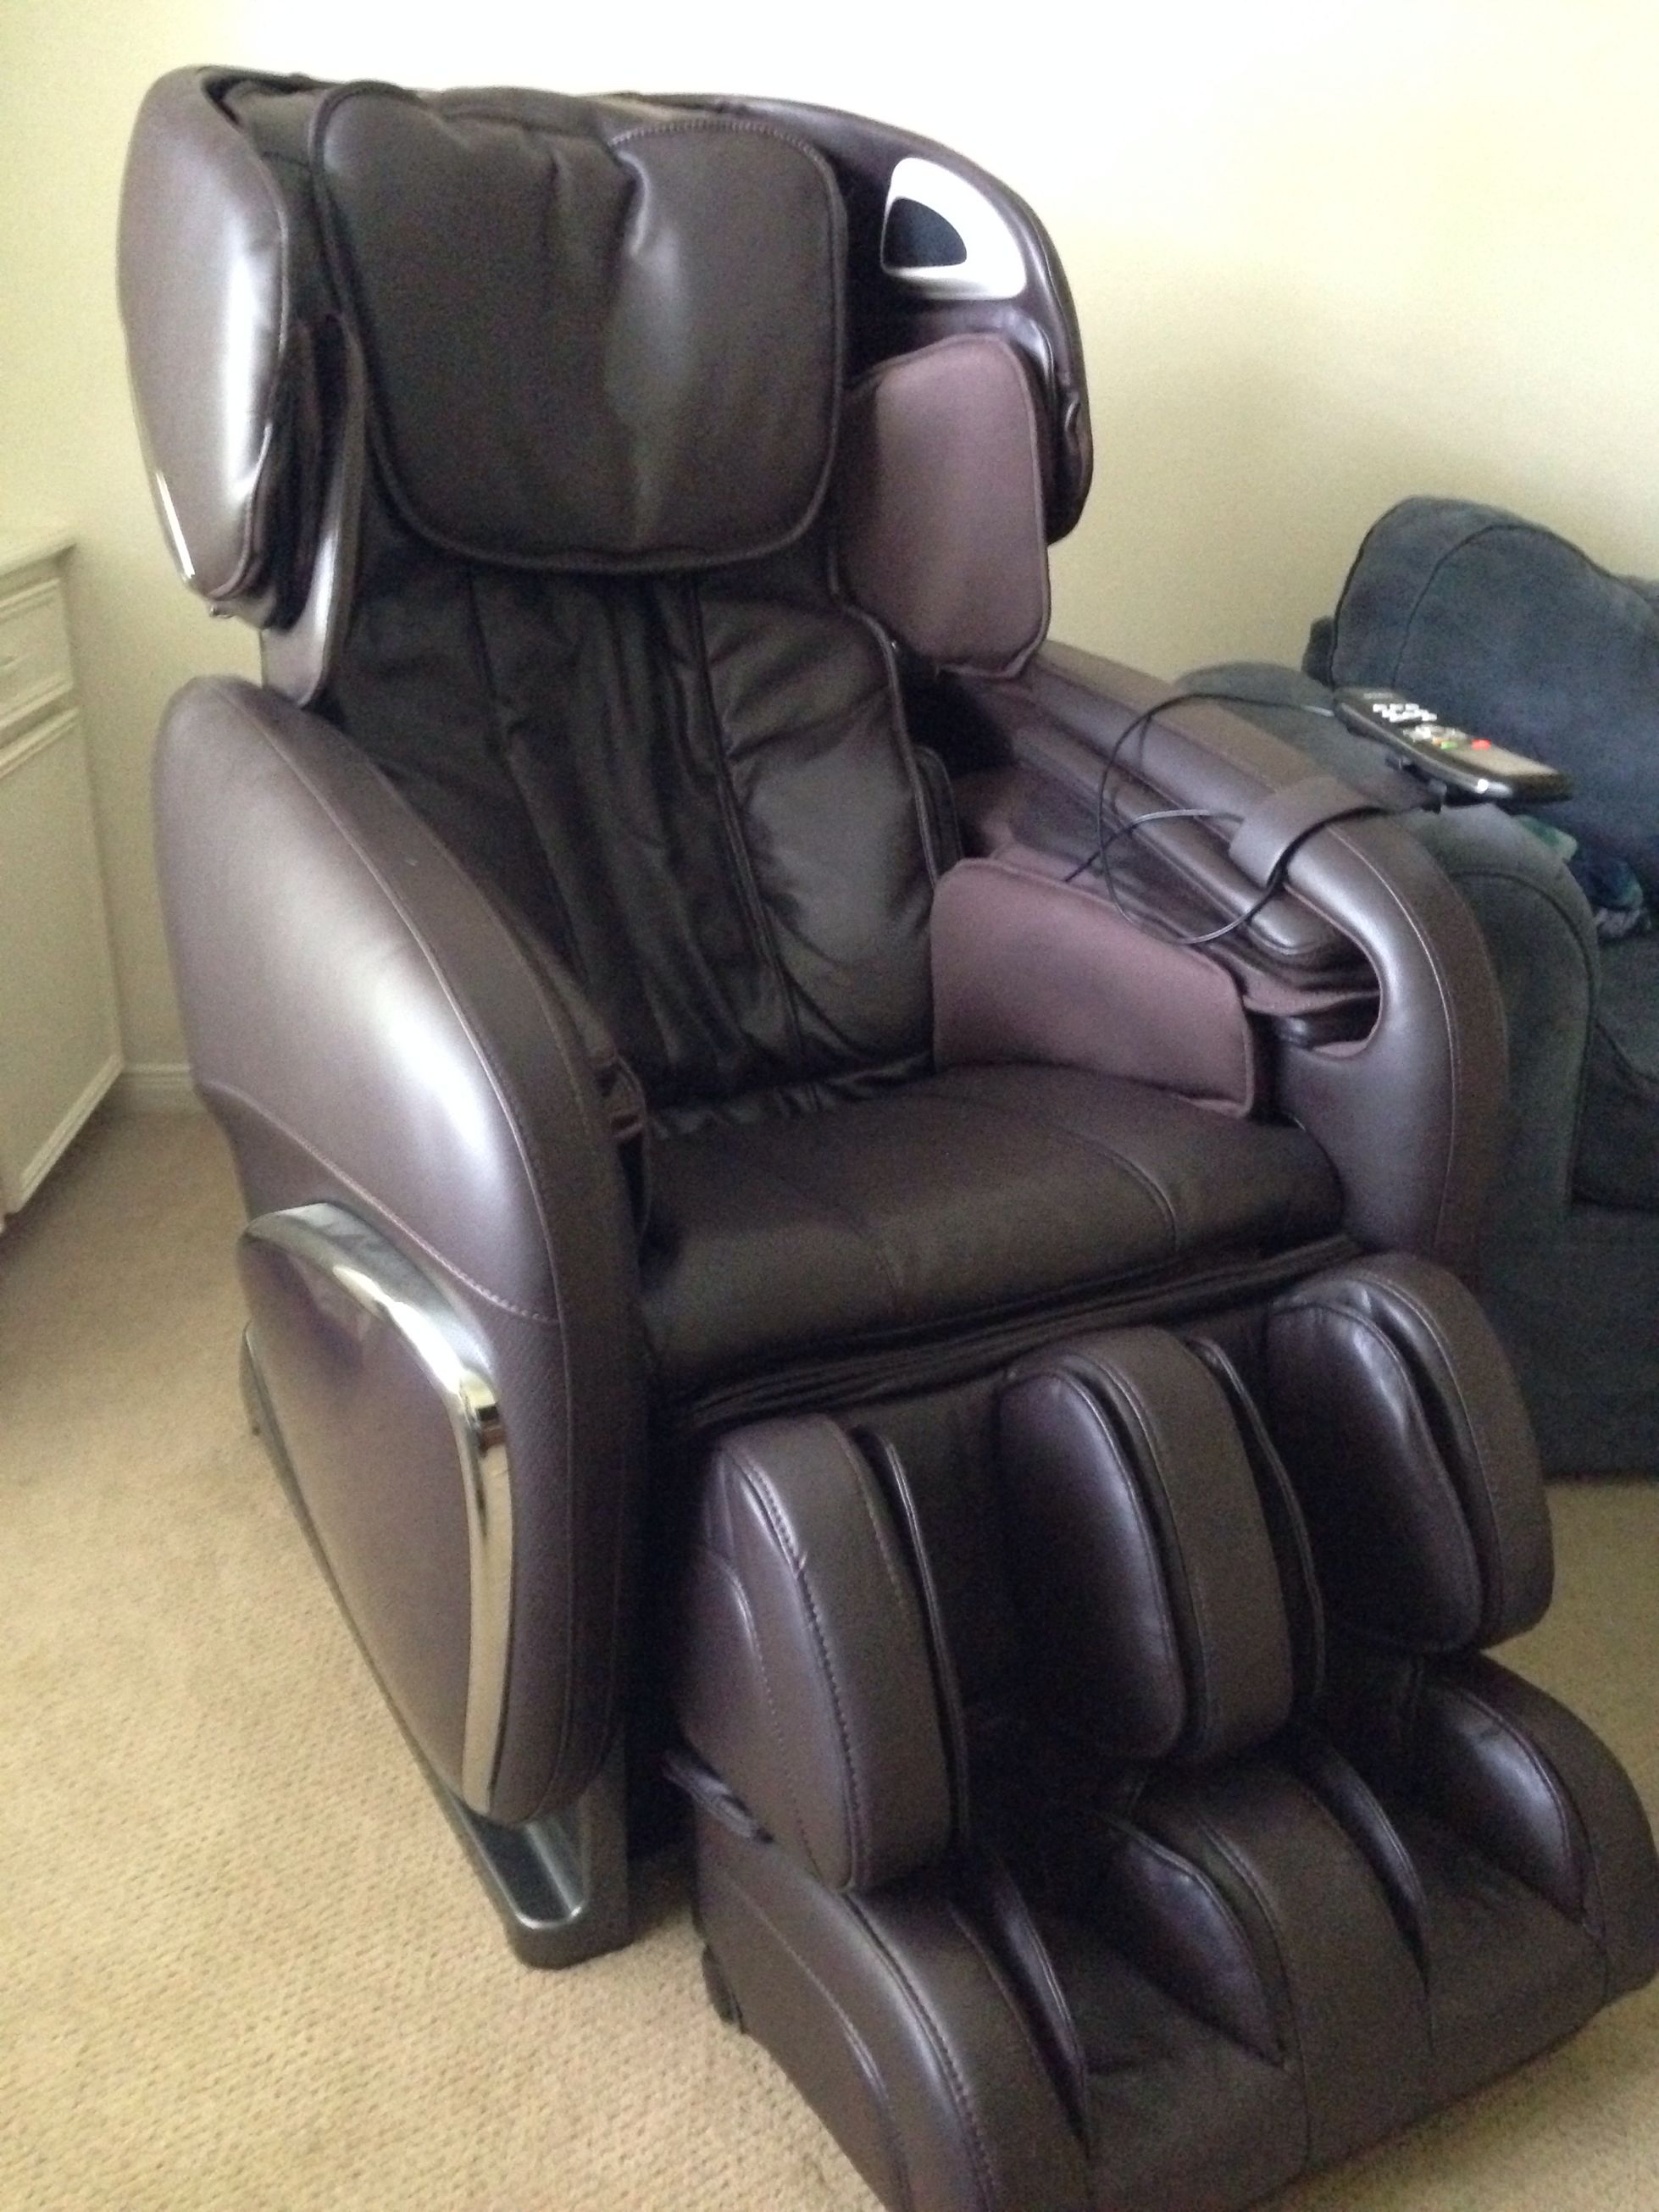 Cozzia Ec 670 Full Body Massage Chair For Sale In Houston Tx 5miles Buy And Sell